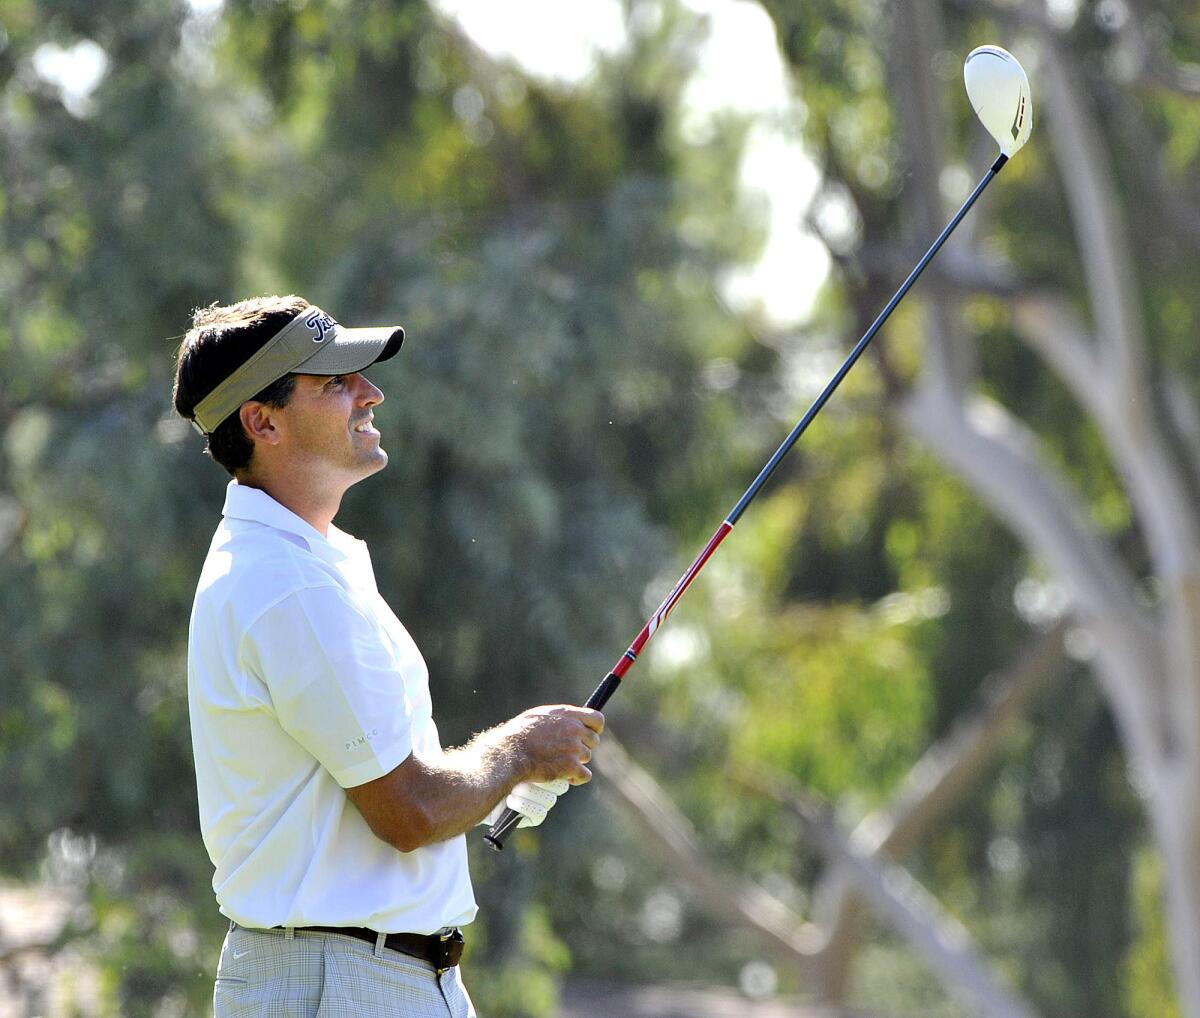 Palm Crest father Todd Reynolda, of La Canada, tees off on the second and watches his shot at La Canada Flintridge Country Club in La Canada Flintridge where the Palm Crest Elementary School PTA's Dad's Committee hosts a golf tournament on Monday, October 21, 2013.